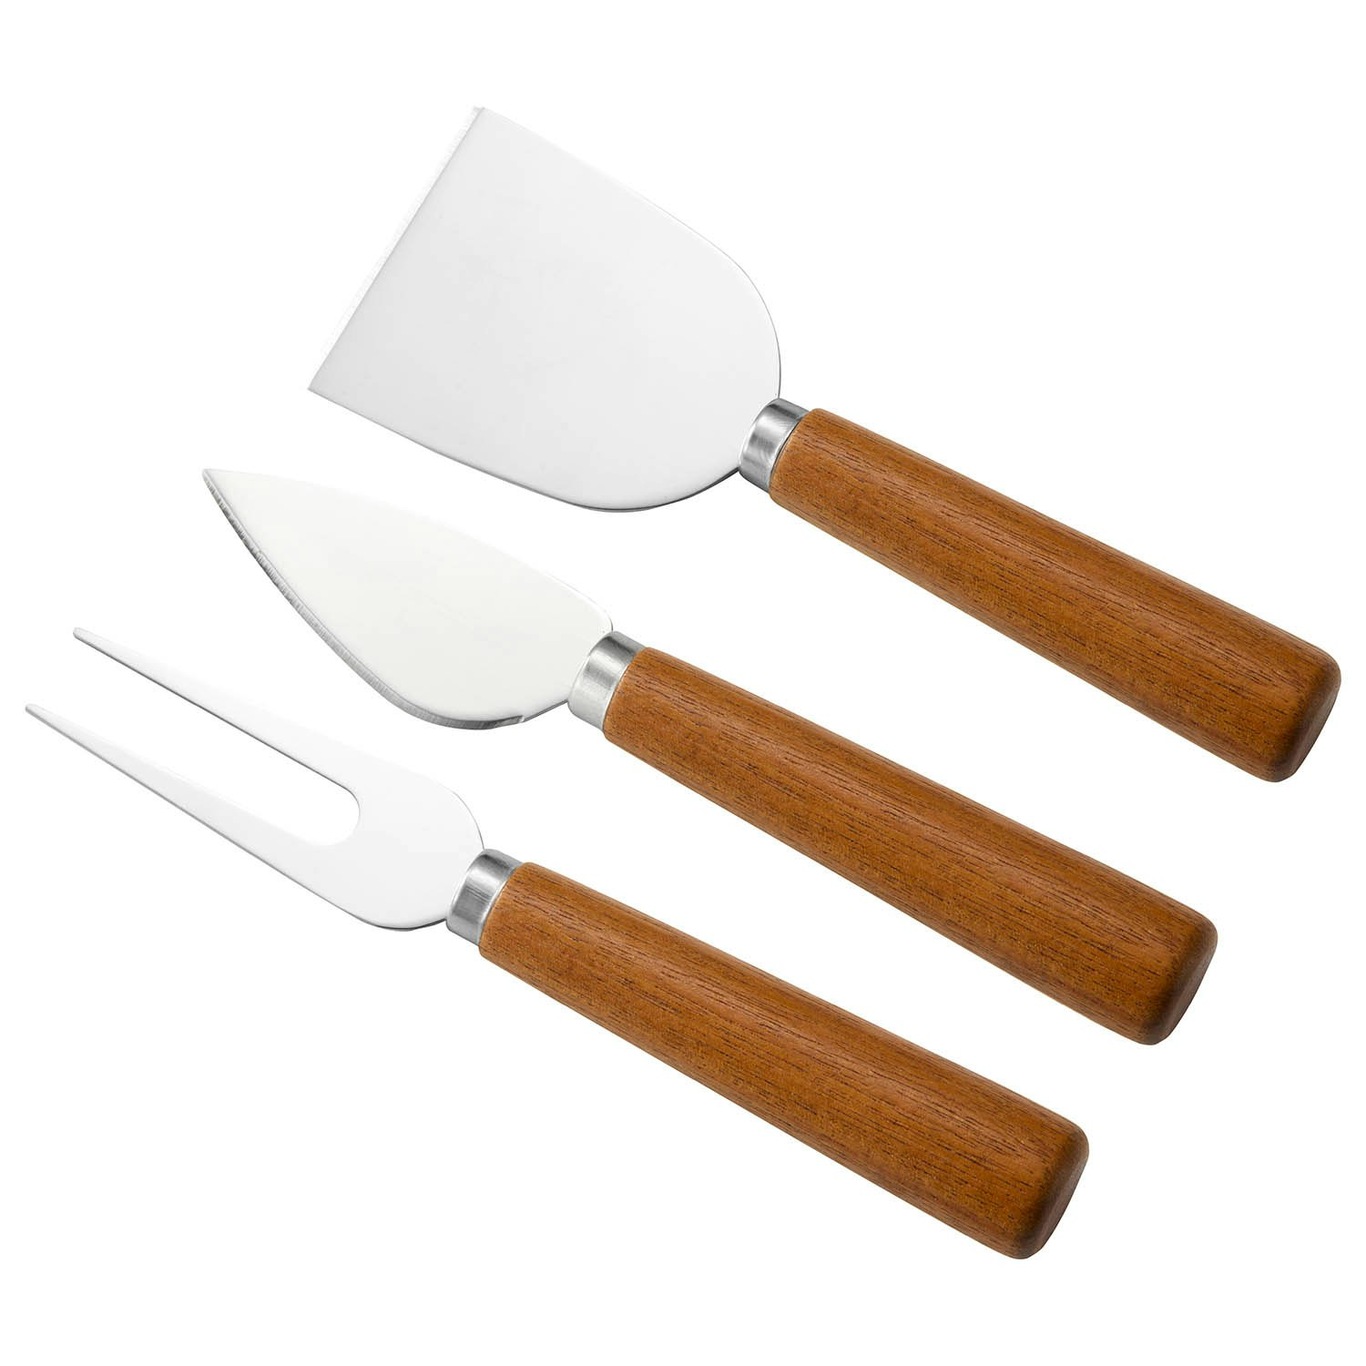 Oleda Cheese Knifes, 3 Pieces